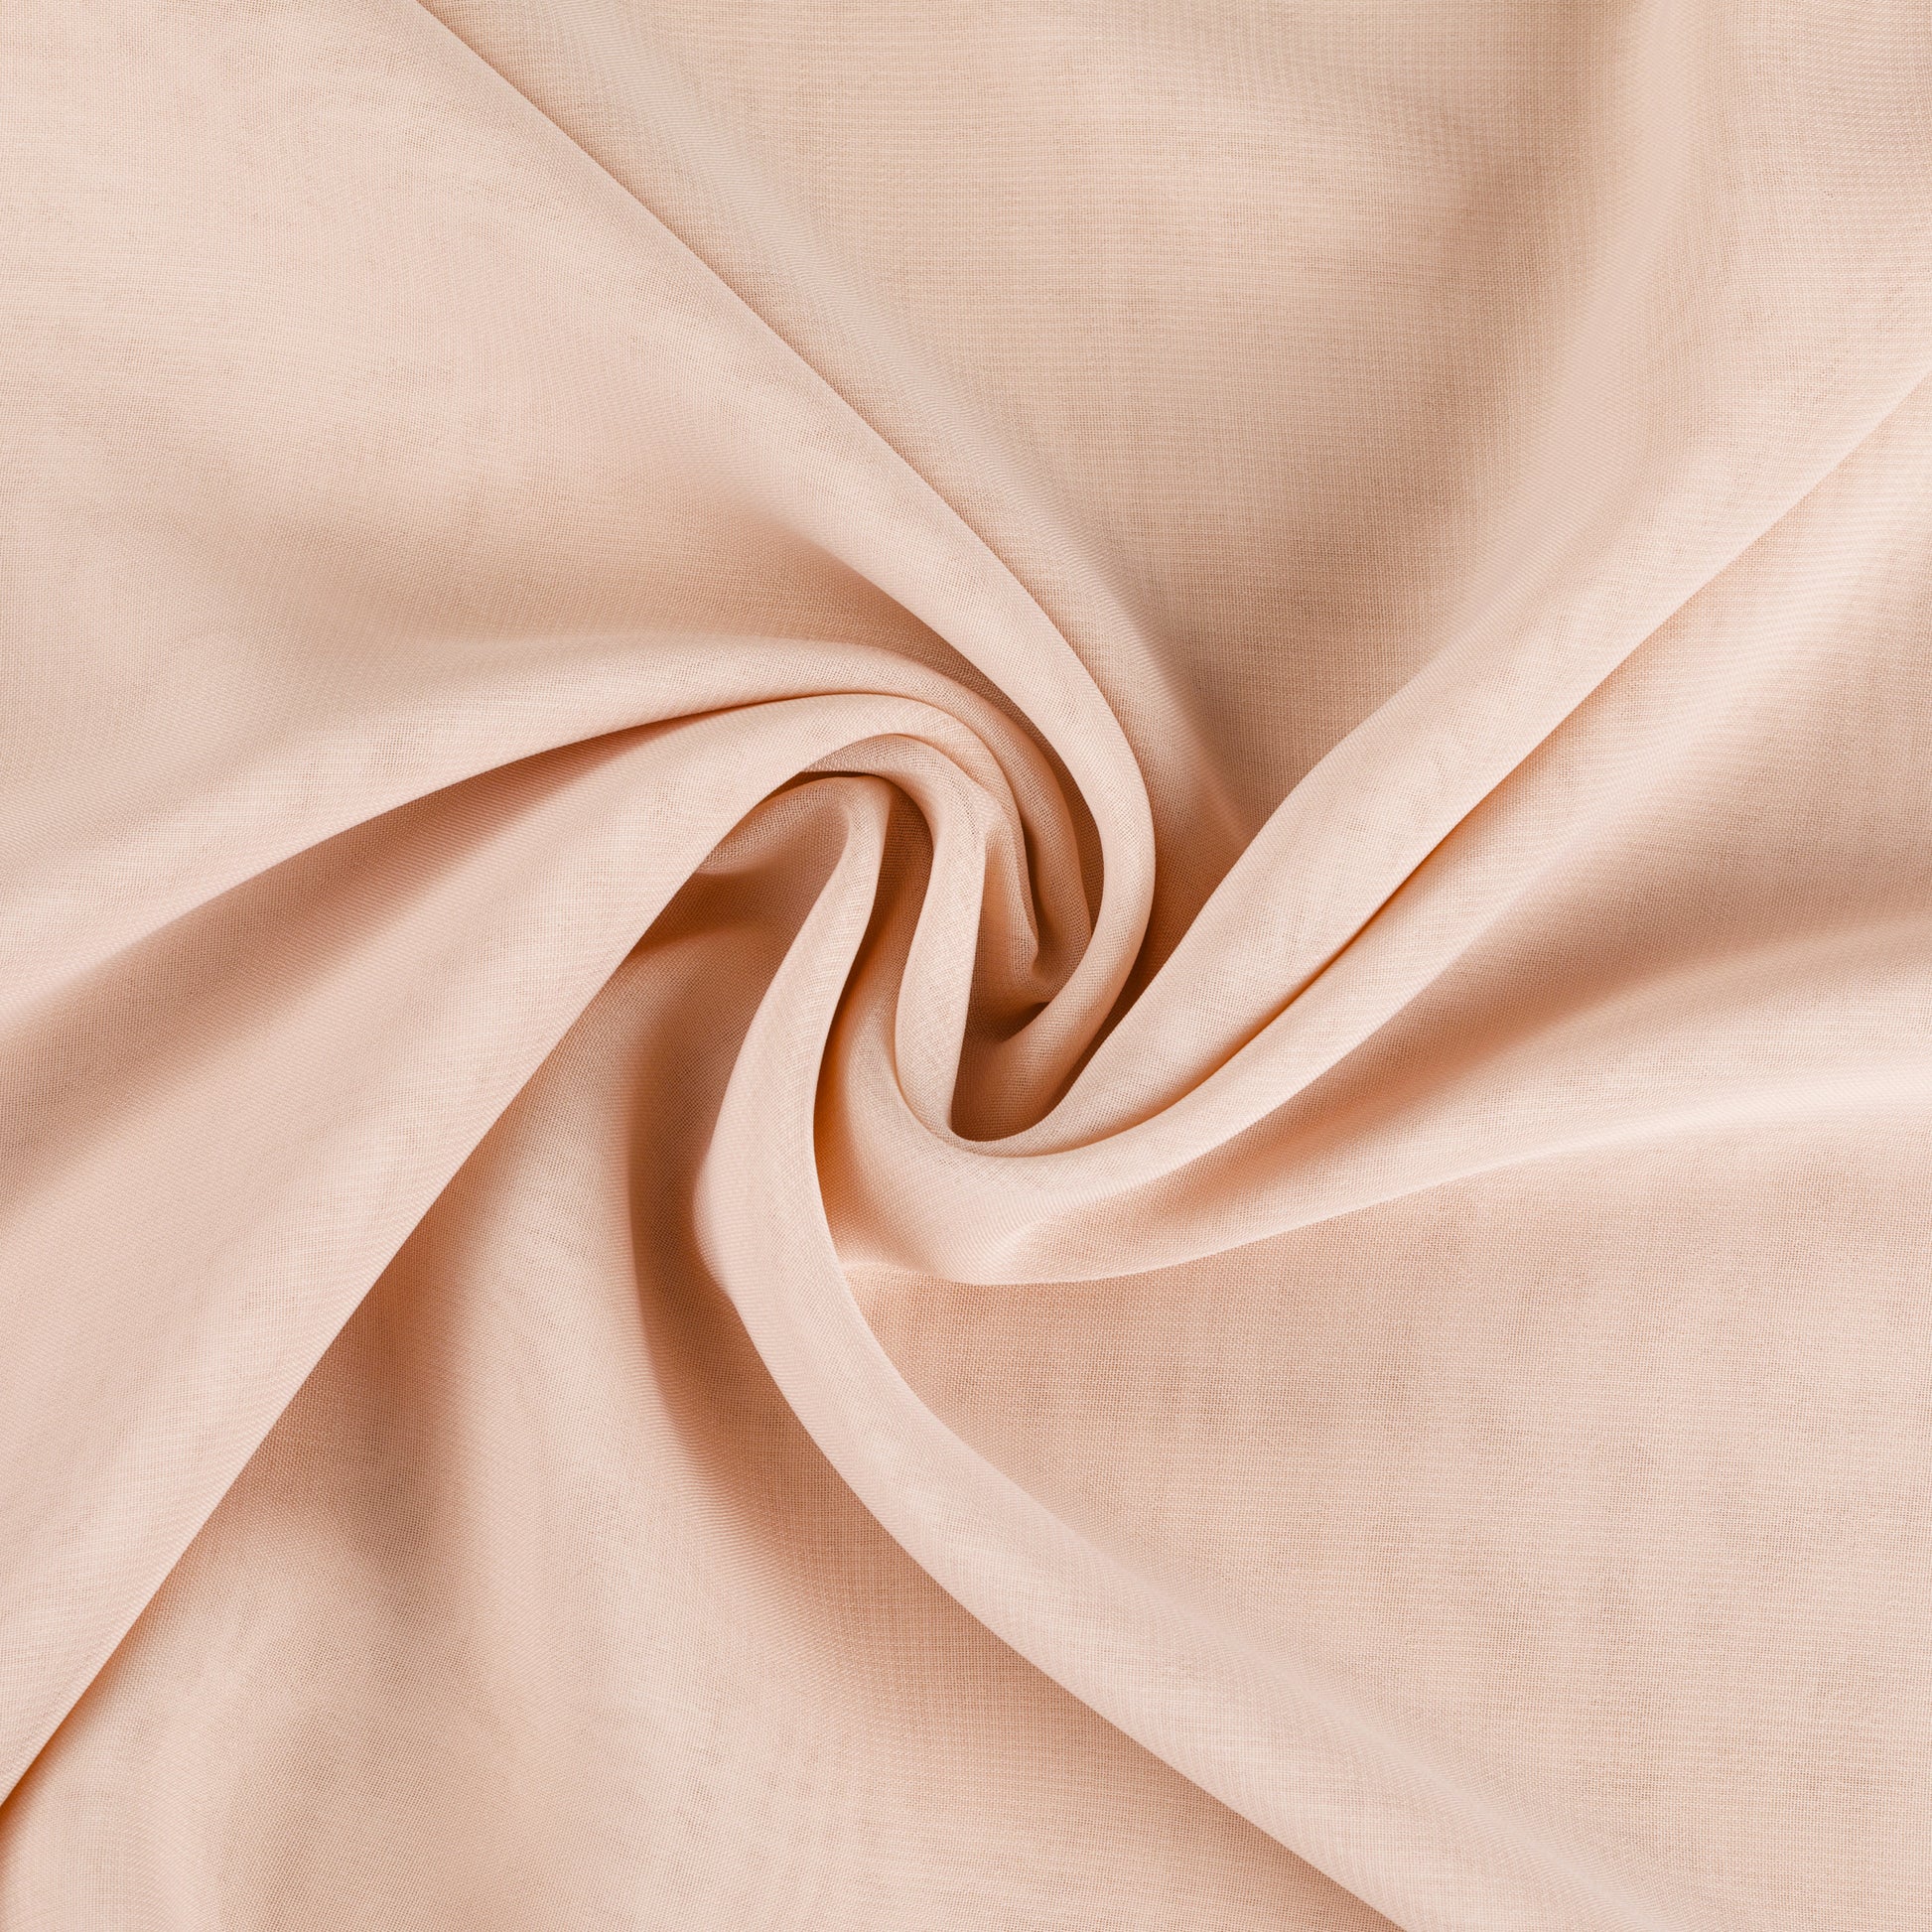  58 White Solid Color Sheer Chiffon Fabric by The Bolt